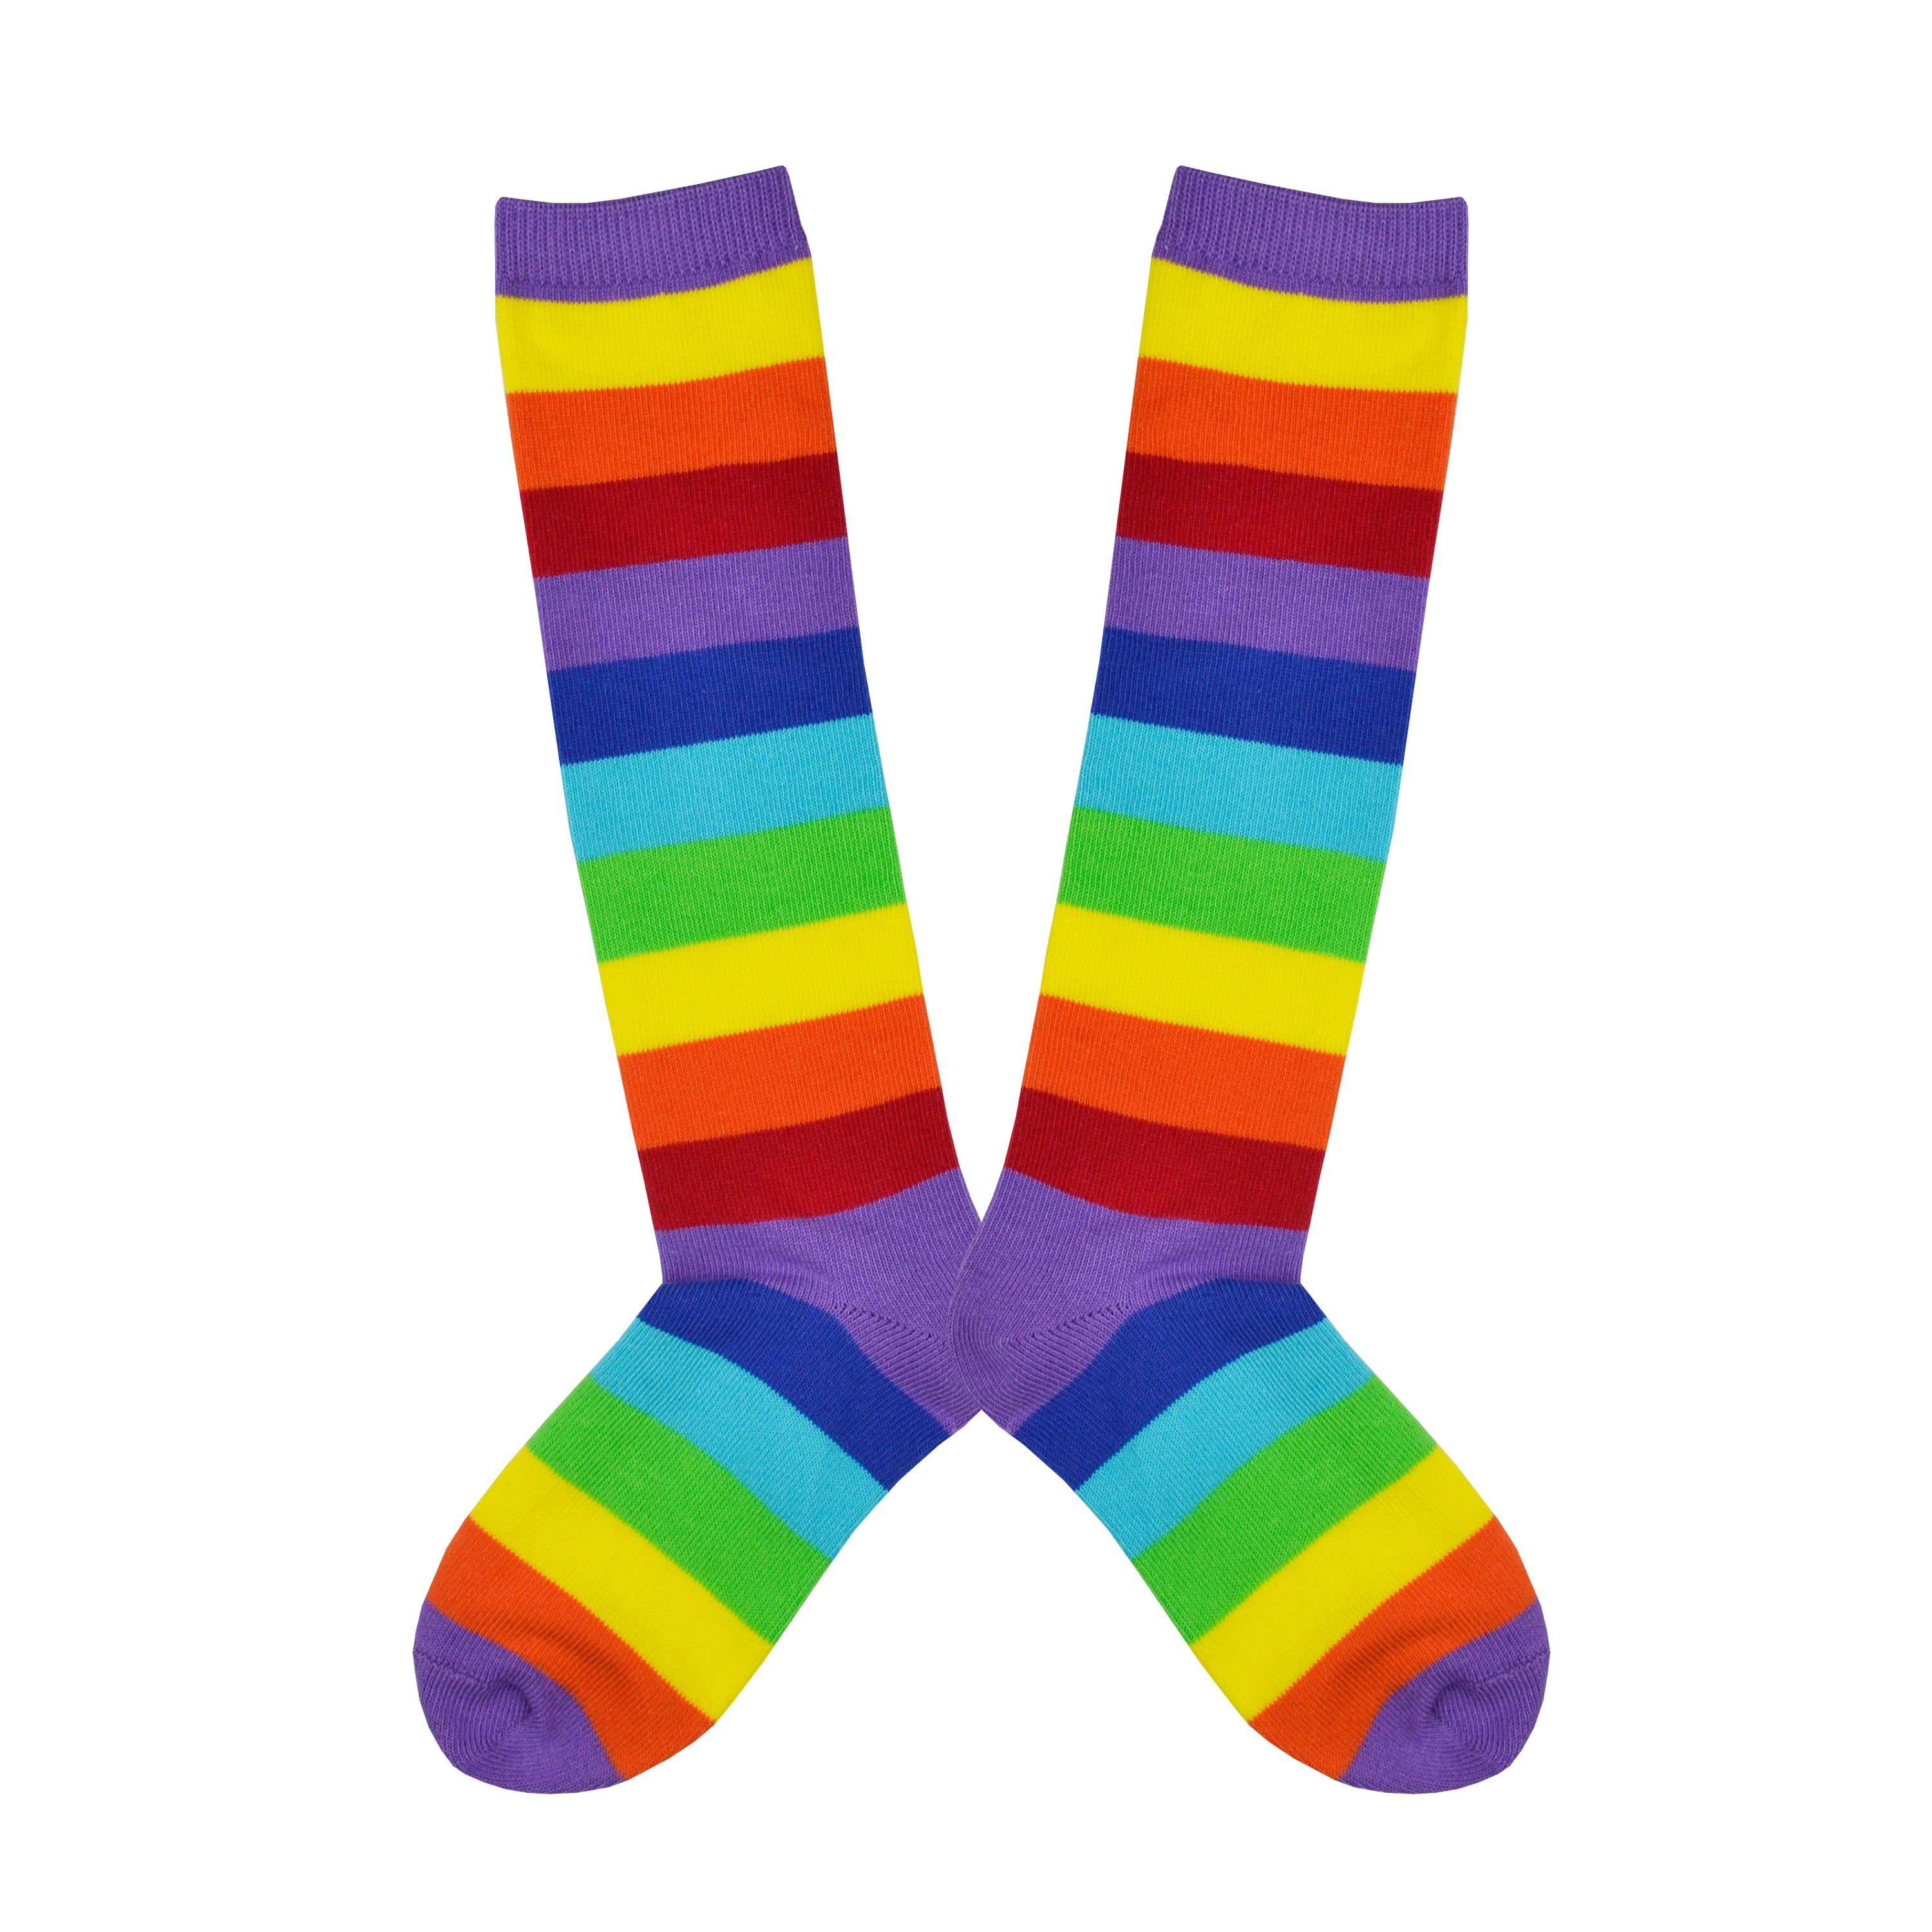 Shown in a flatlay, a pair of children's knee high Sock it to Me brand cotton socks with a purple heel, toe, and cuff. The rest of the sock is a classic rainbow stripe in yellow, orange, red, purple, indigo, blue, and green.